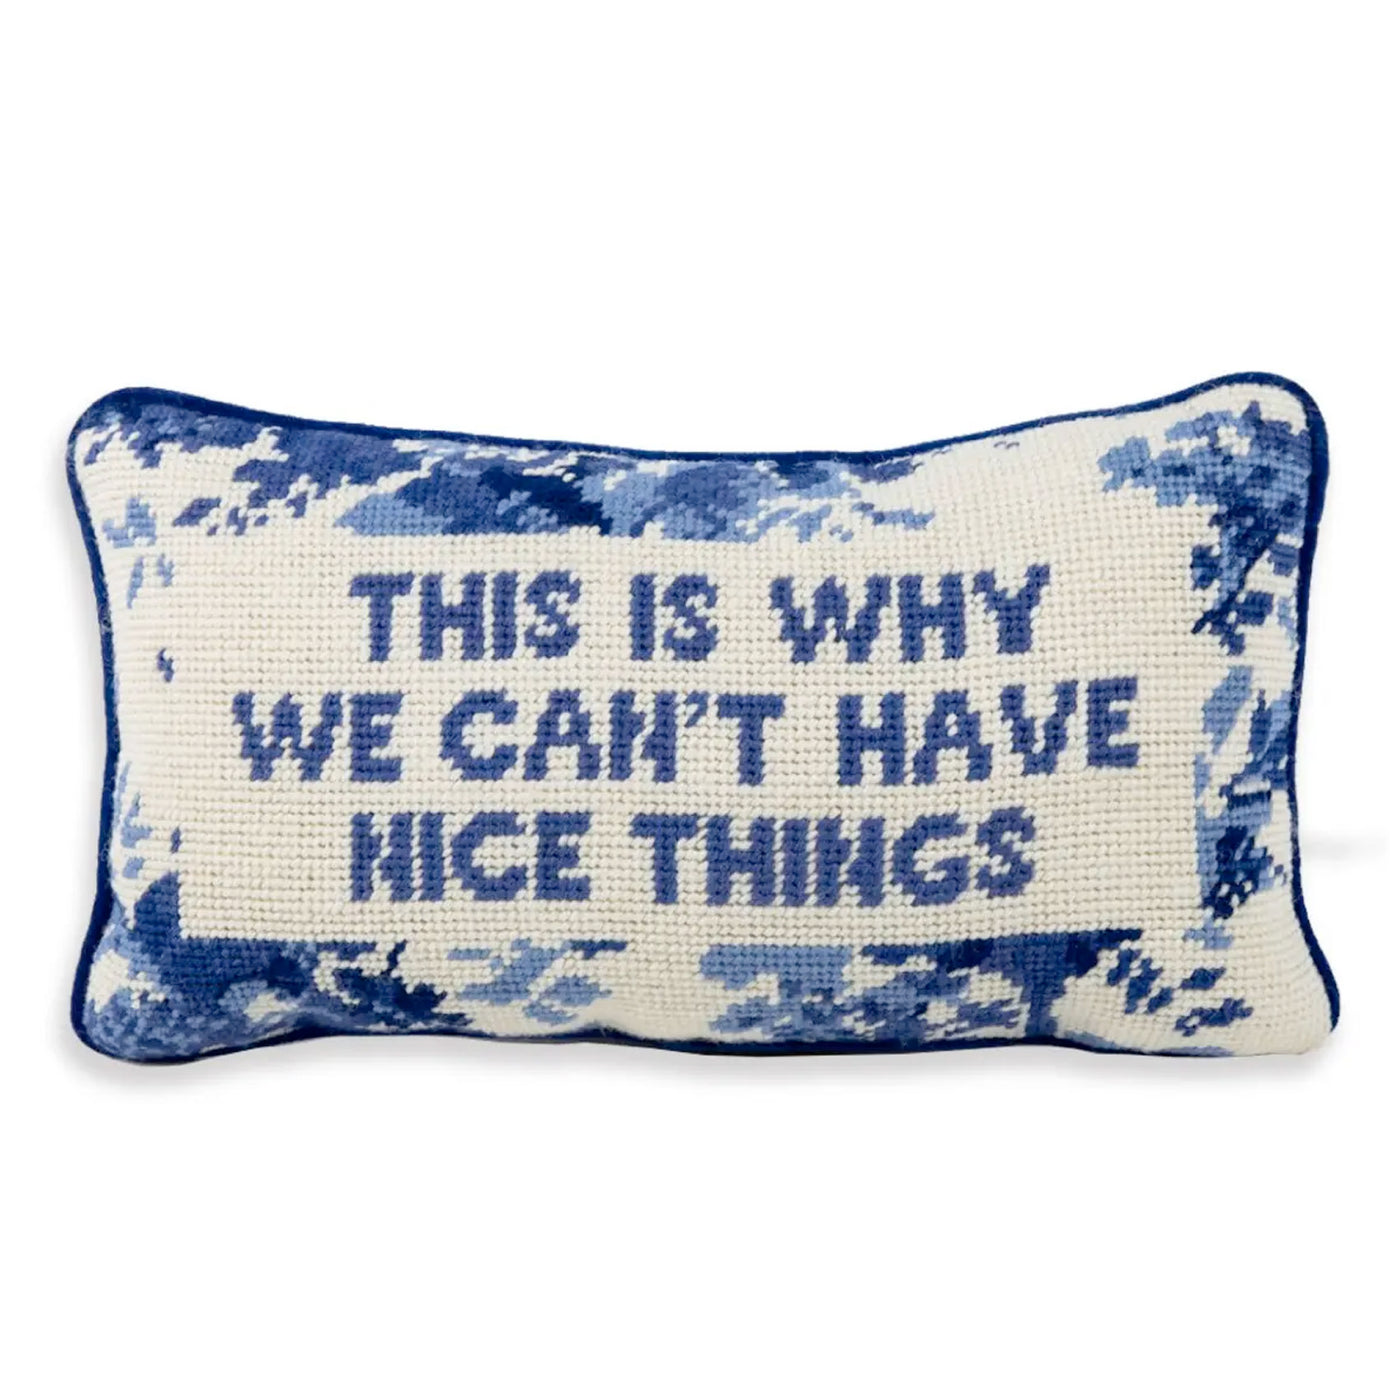 This Is Why We Can't Have Nice Things Needlepoint Pillow